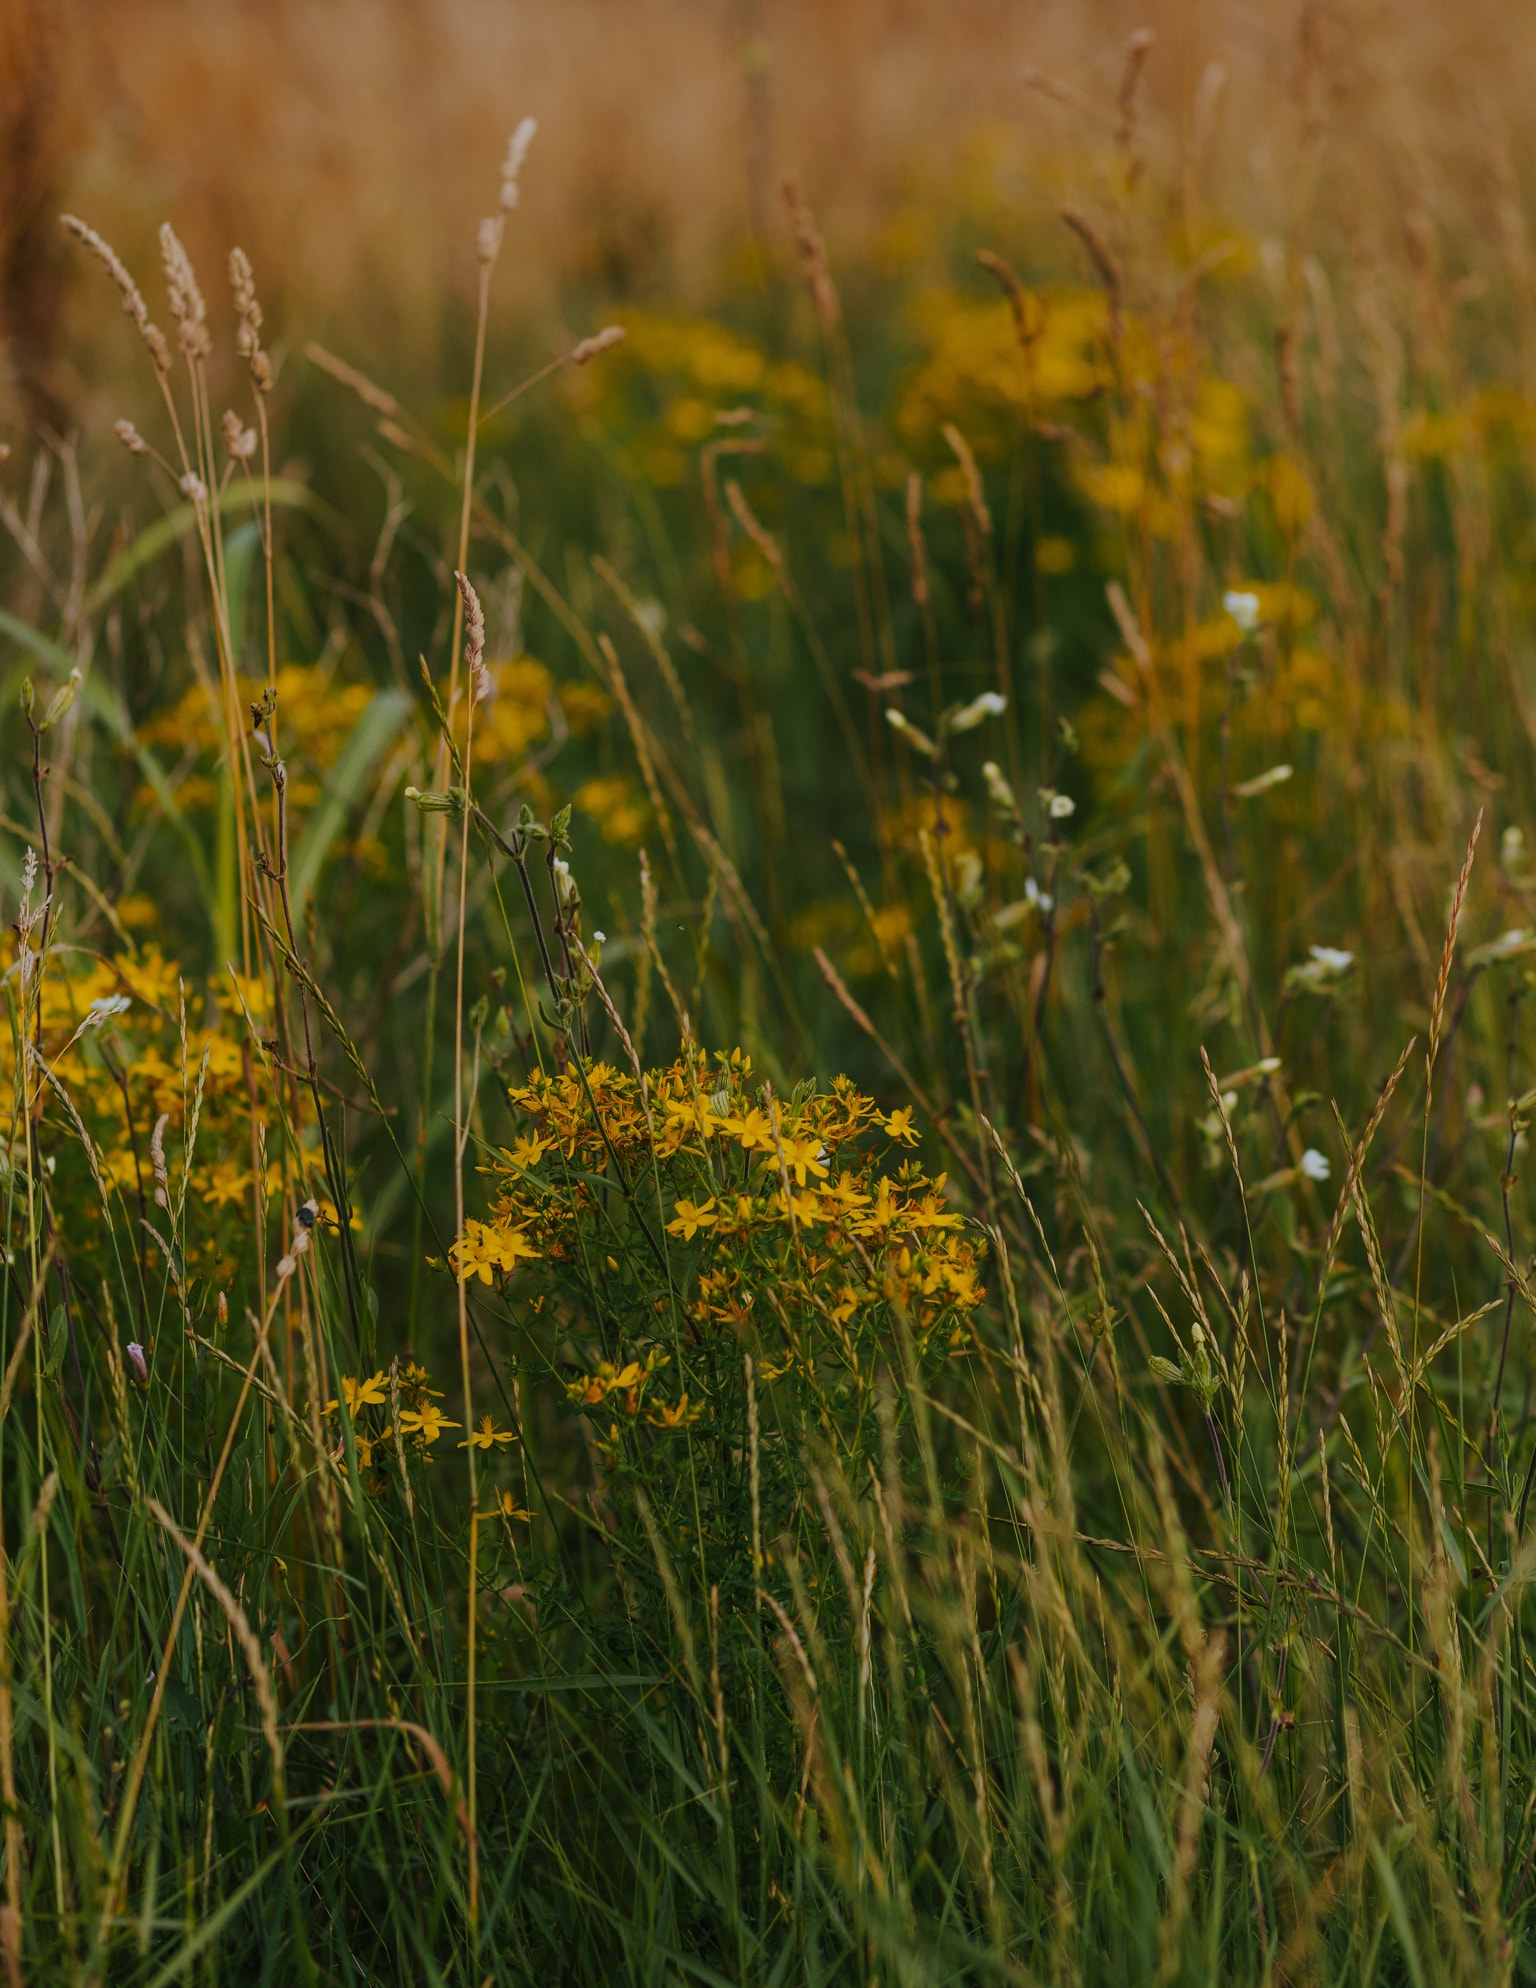 Free picture: Yellowish brown wildflowers in grassy meadow